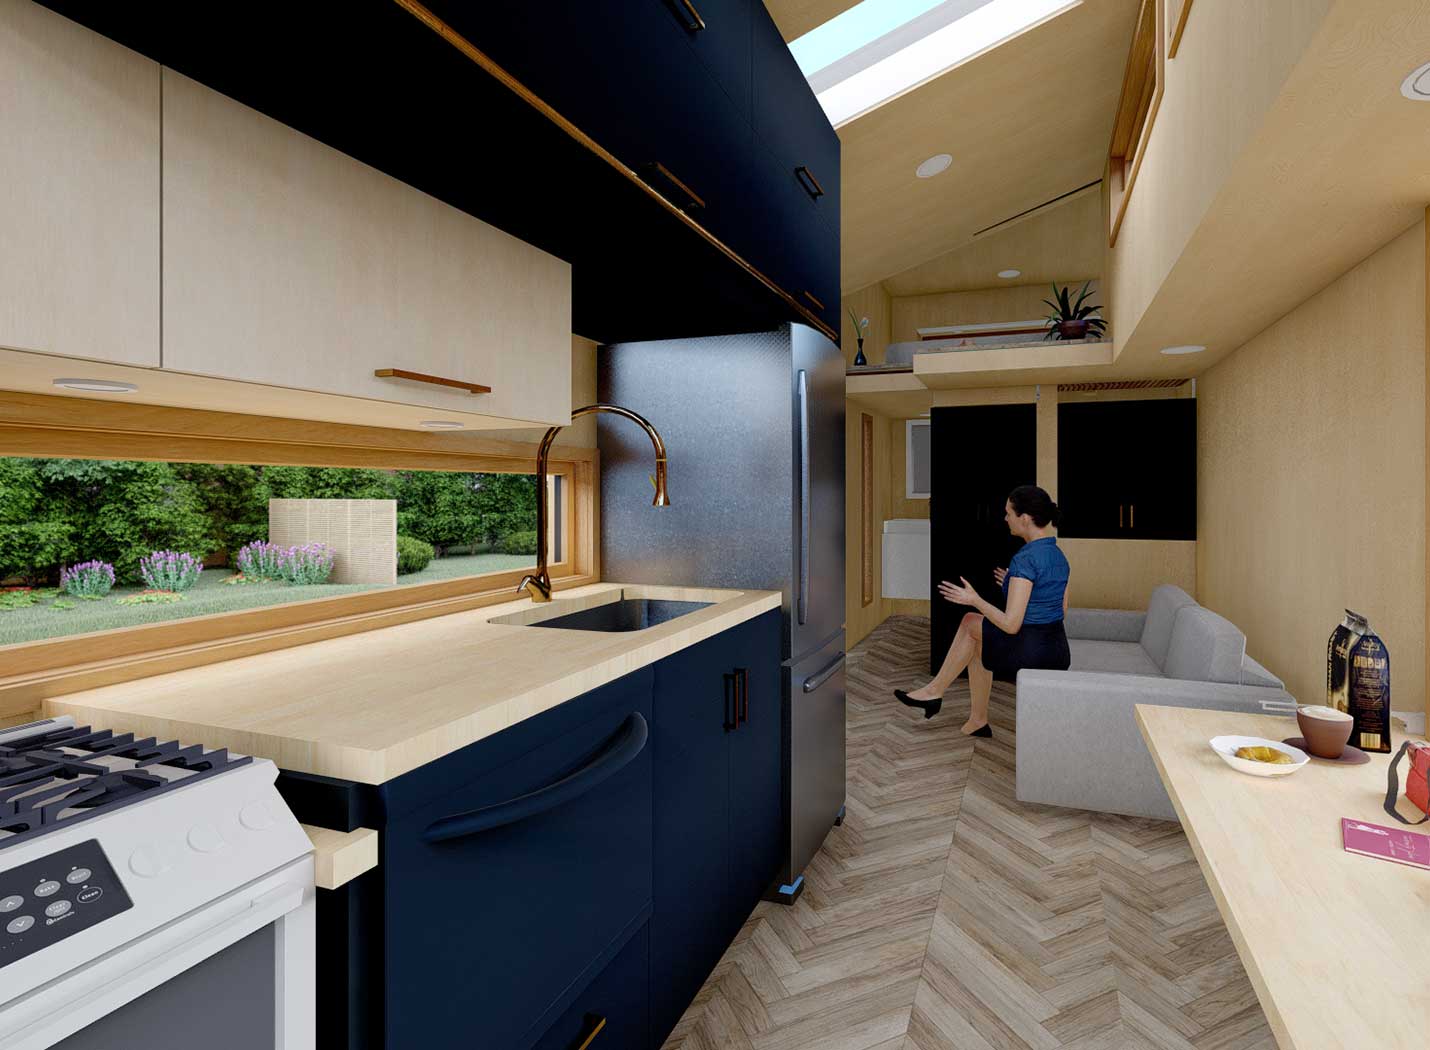 Interior of the Journey Tiny House, part of the Signature Series